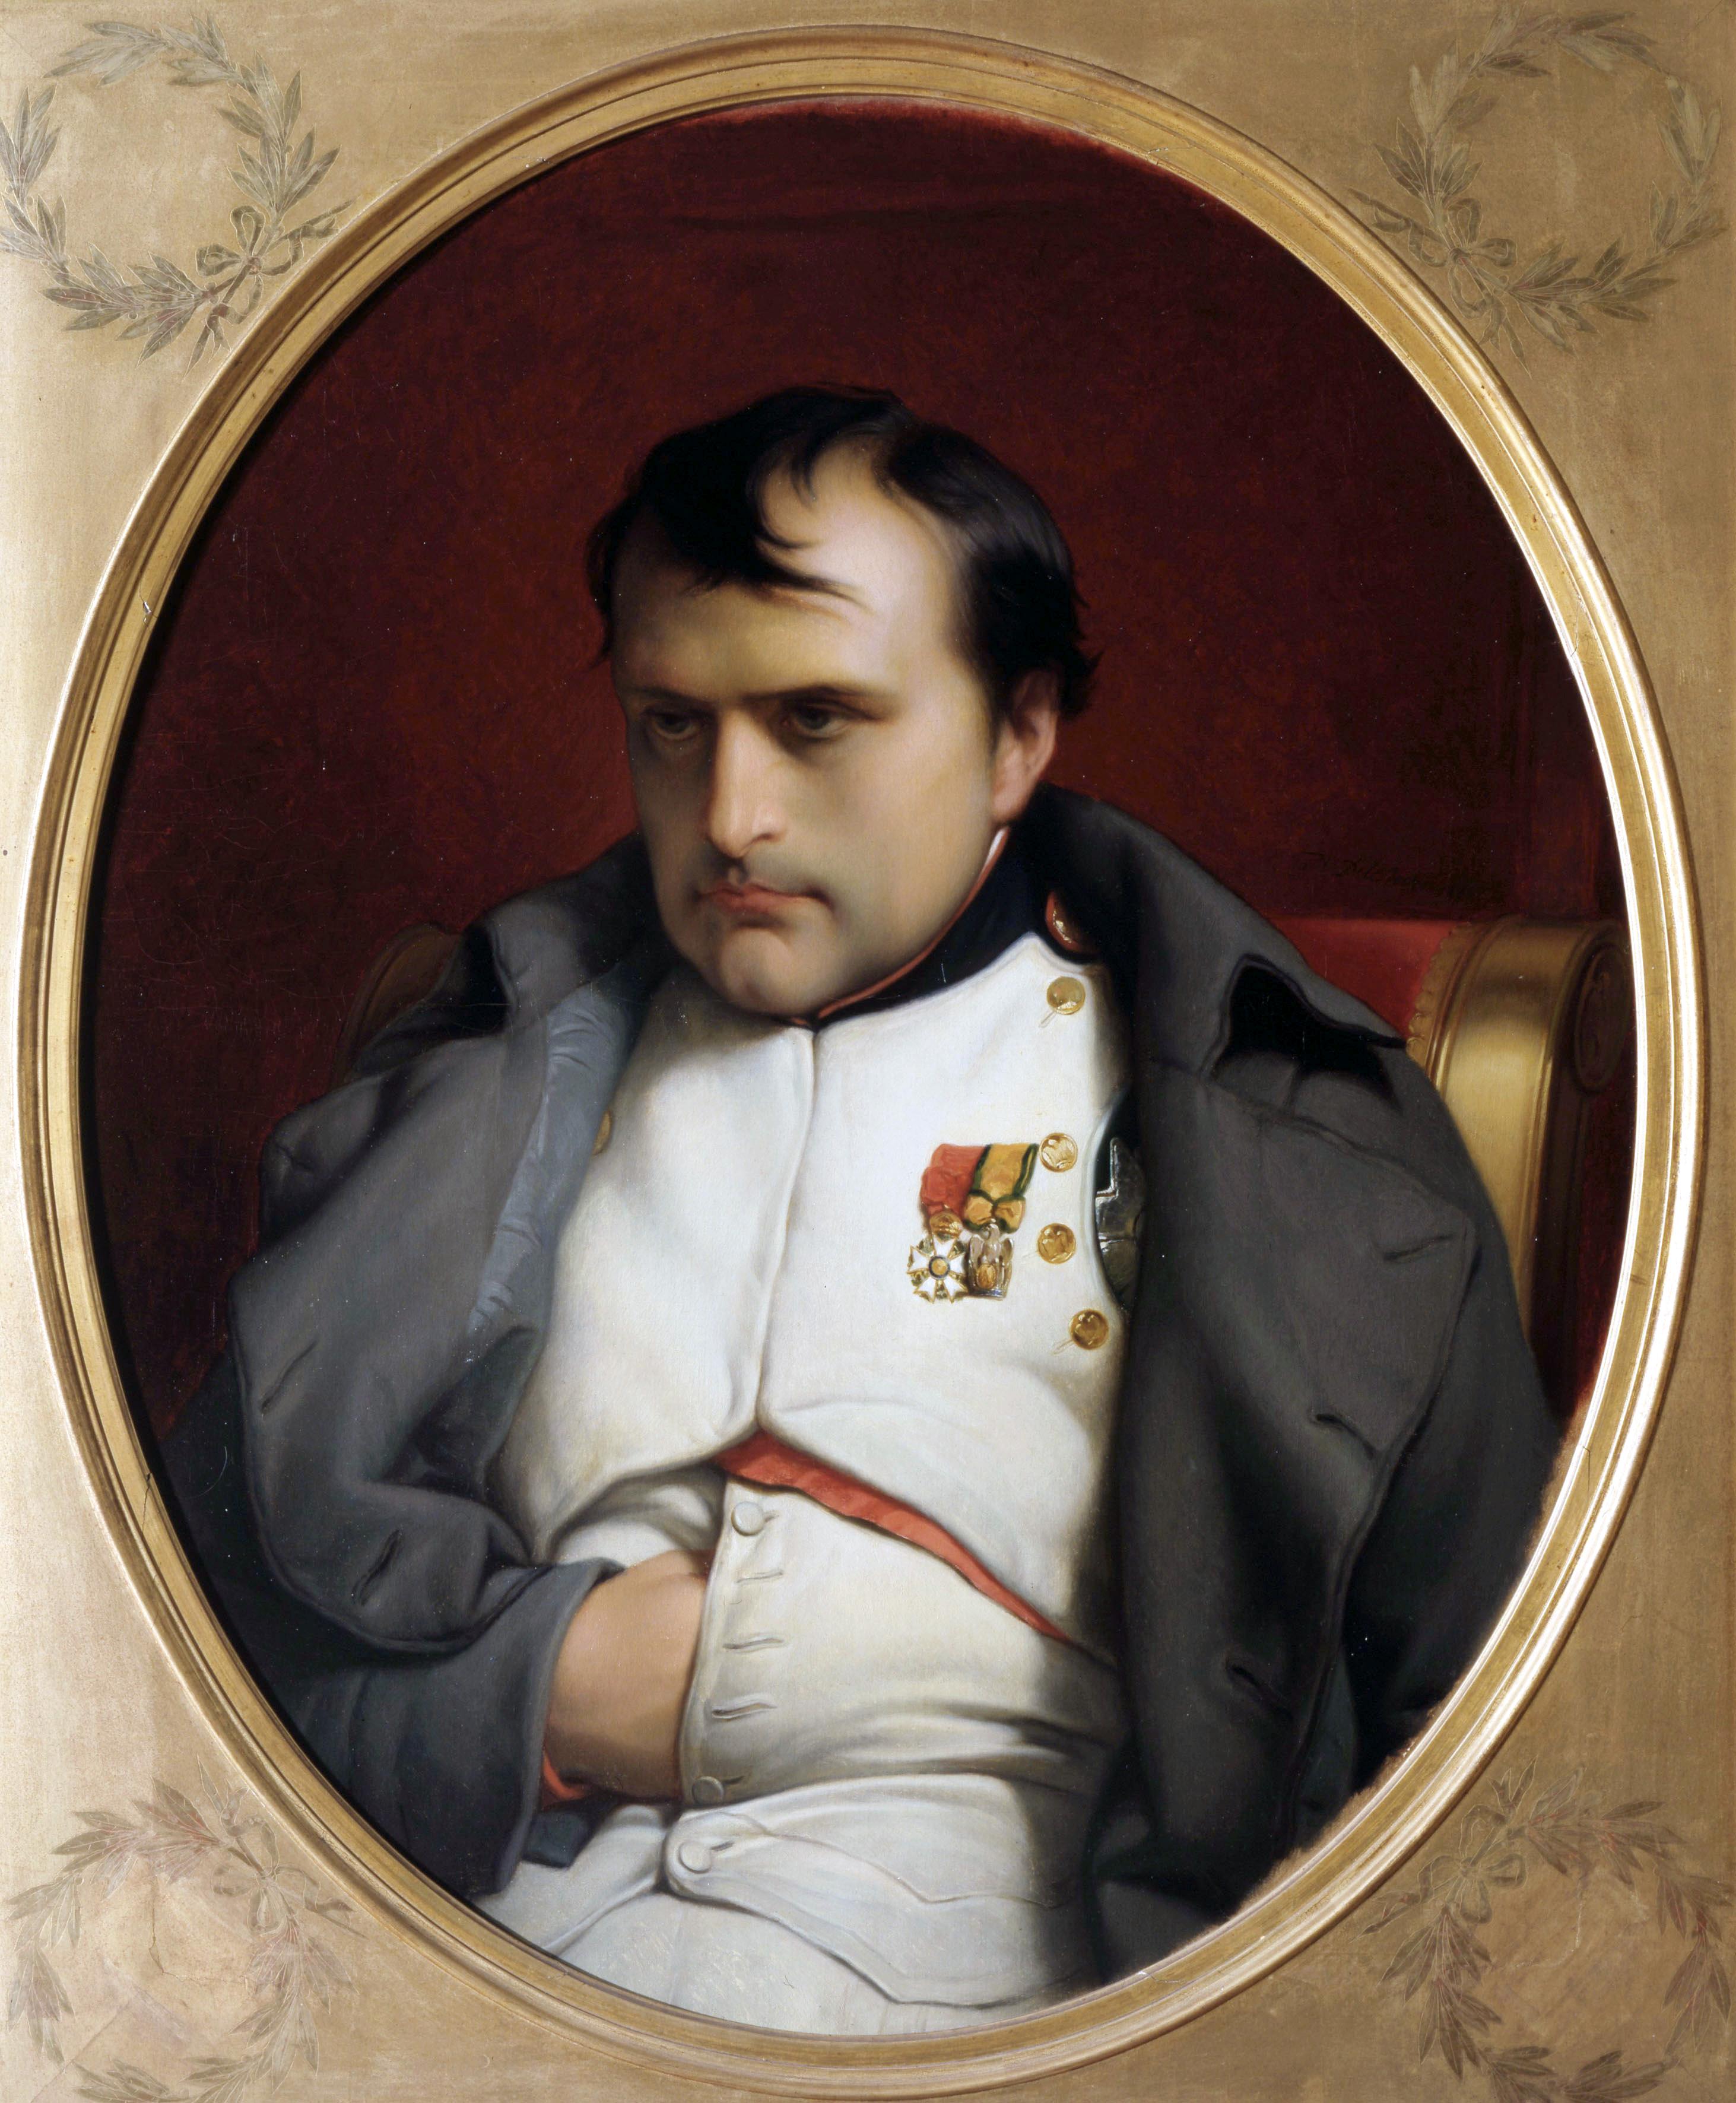 Napoleon - never satisfied and hand always cold. Tyrant to many, short to some.